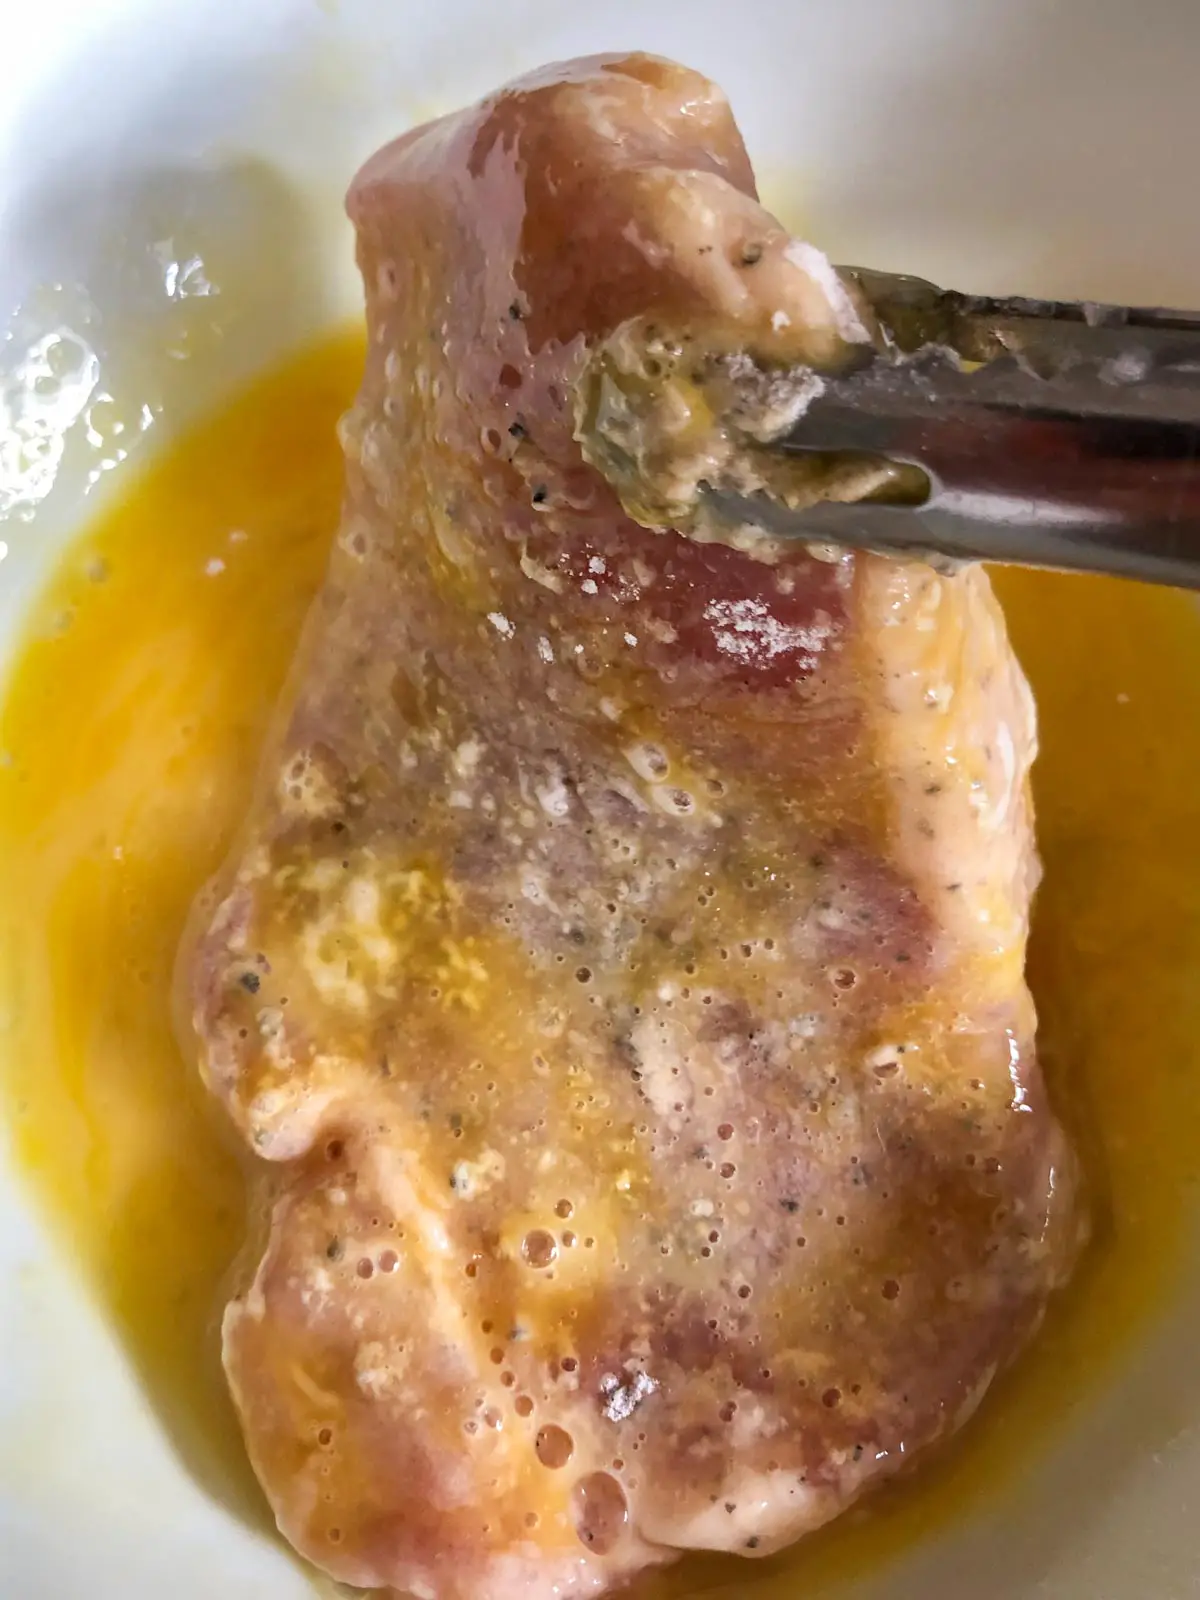 A pork chop coated in flour being dipped into whisked egg that was placed in a white bowl with tongs holding the pork chop.